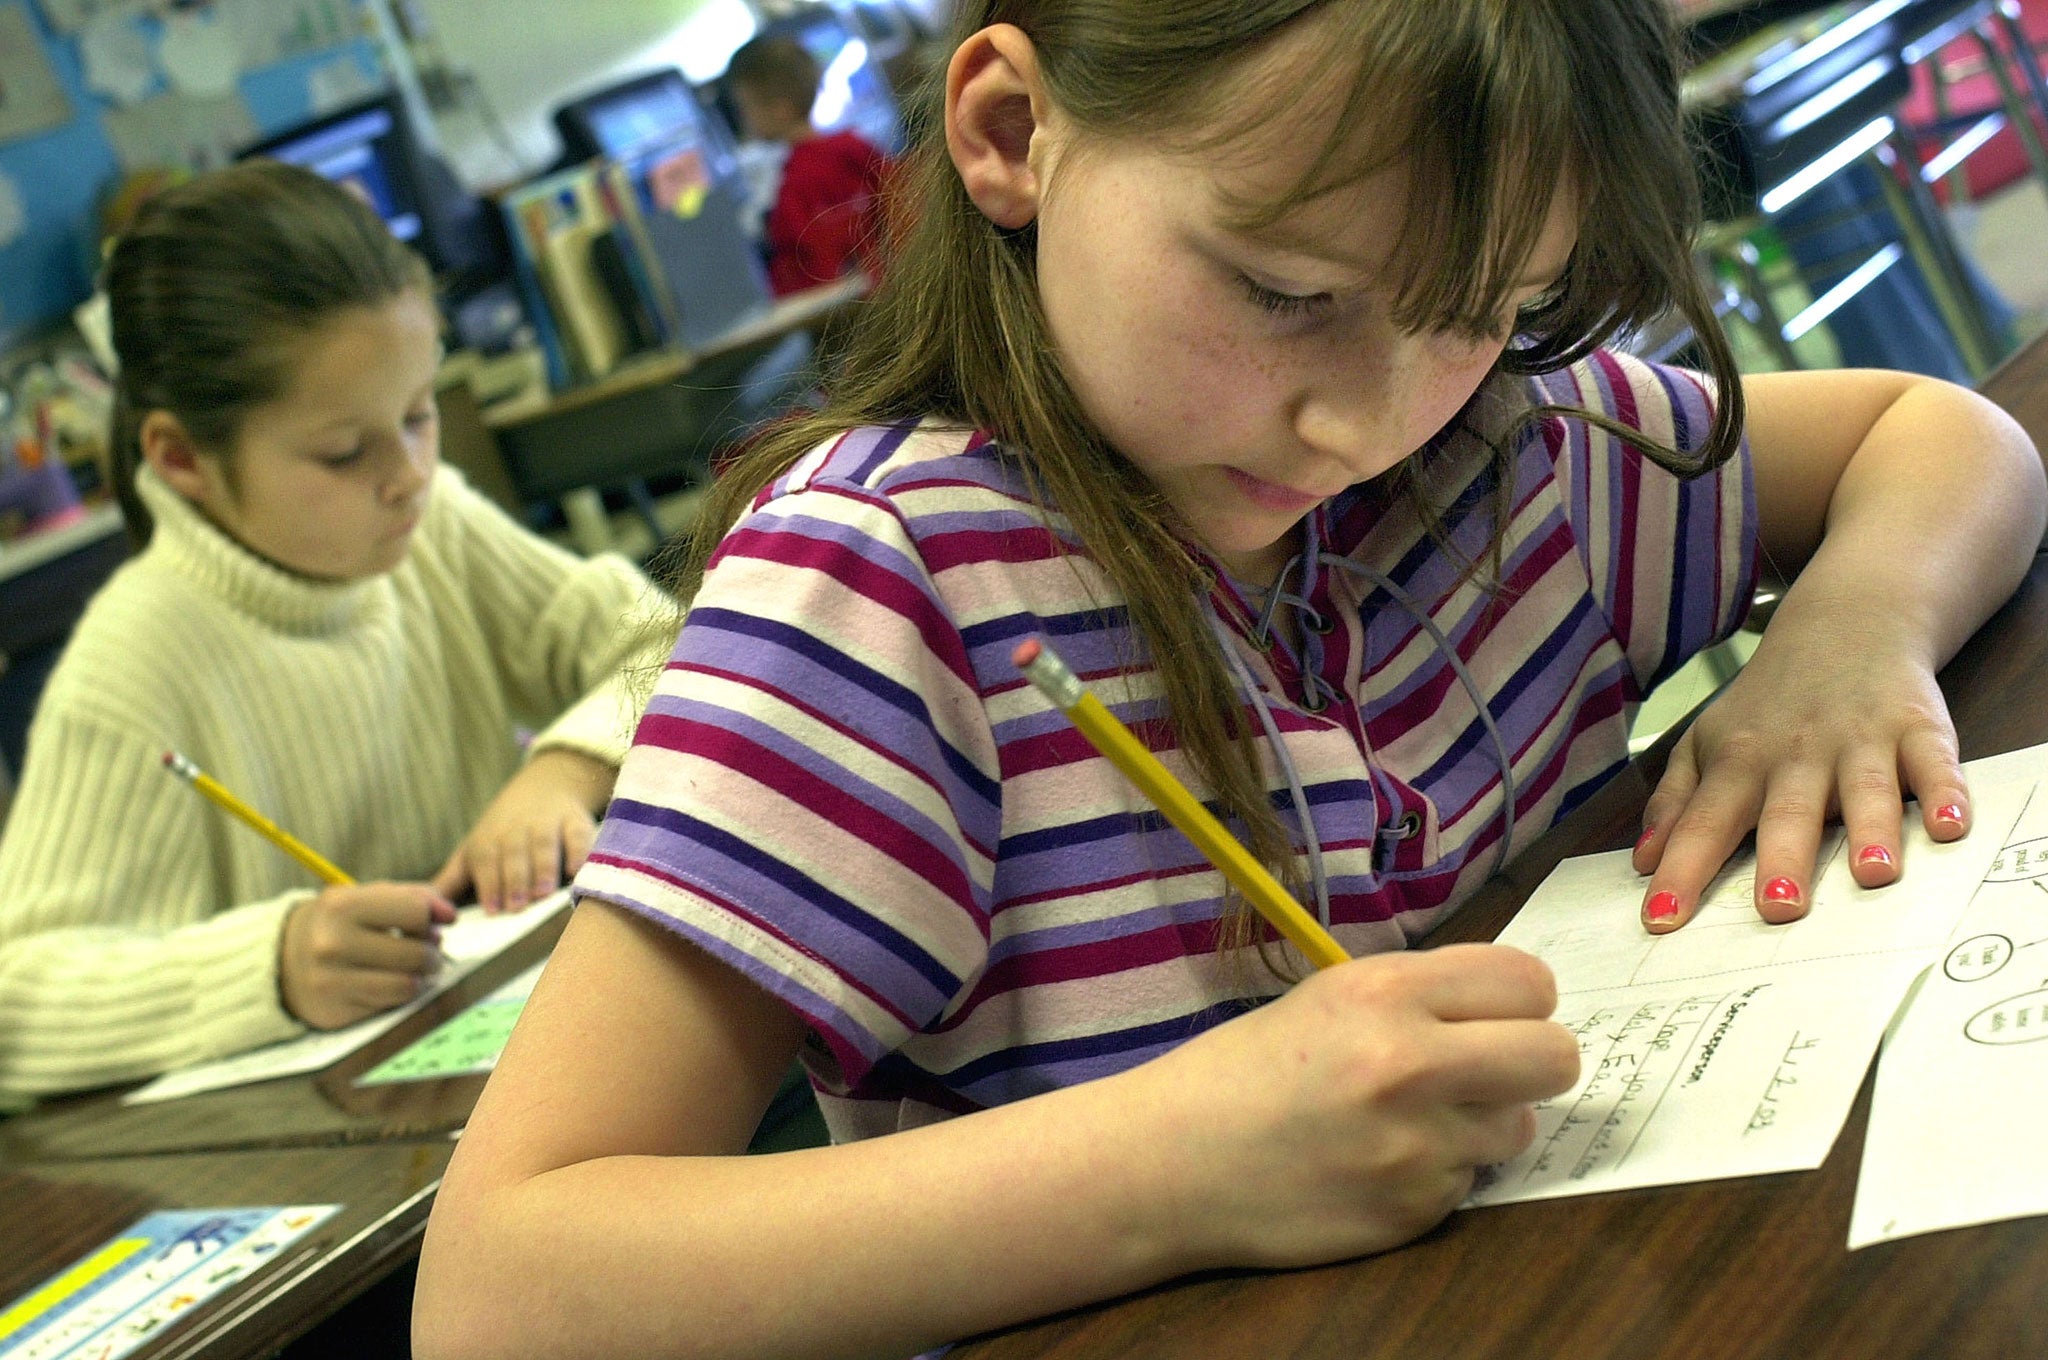 Cursive handwriting will be scrapped from the Finnish education curriculum and replaced by lessons in keyboard typing